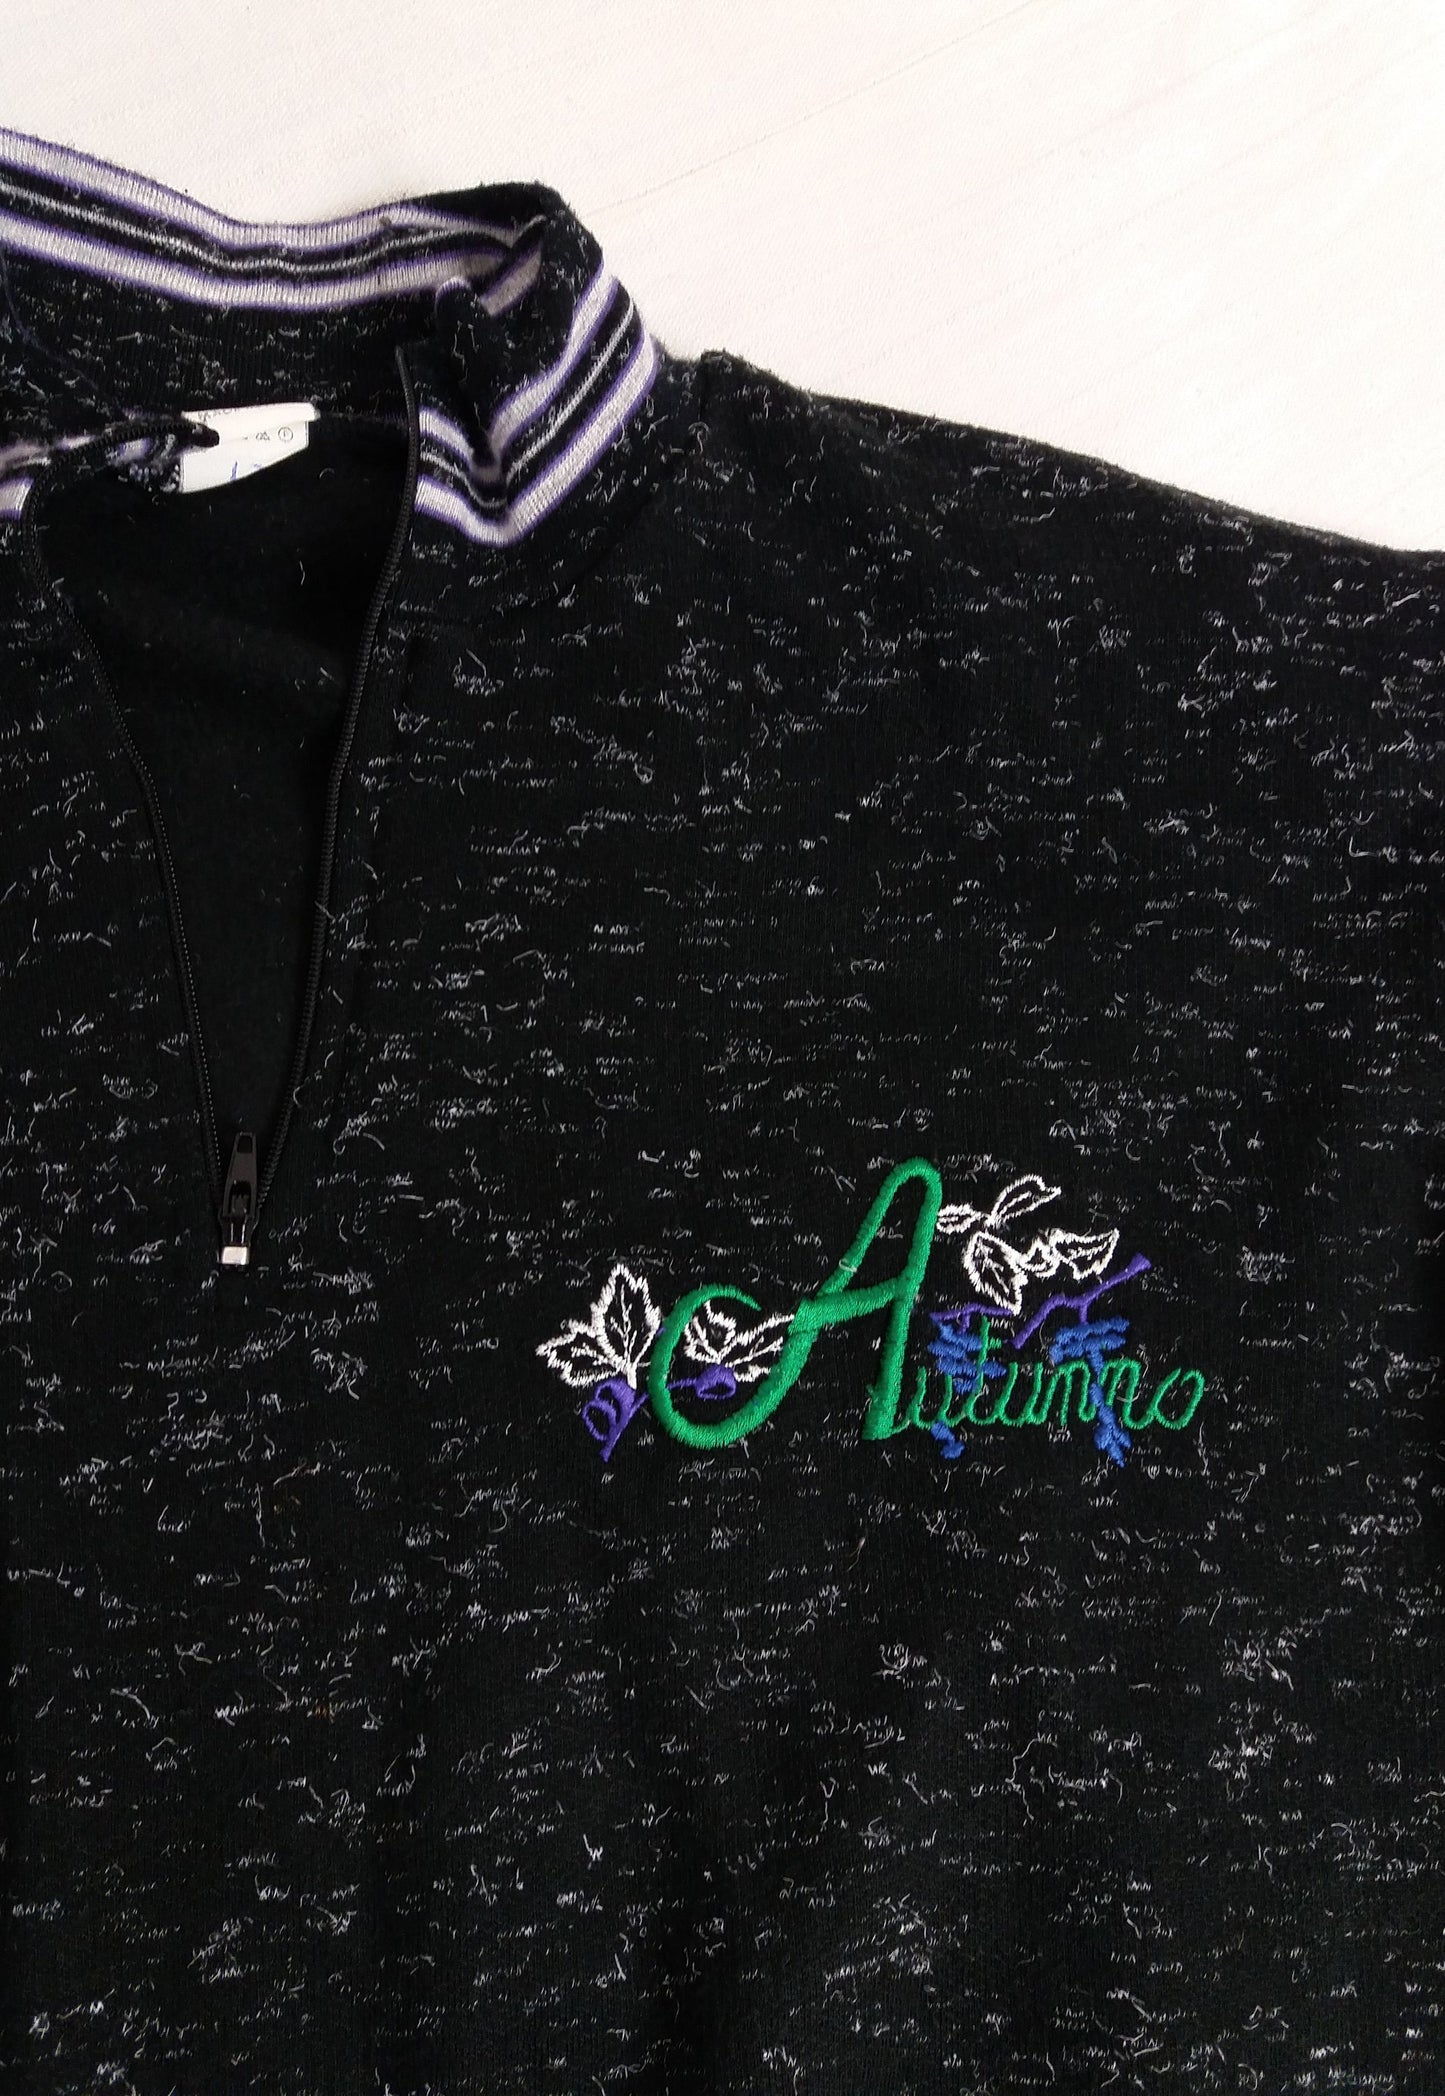 90's Embroidery 1/4 Zip Sweater